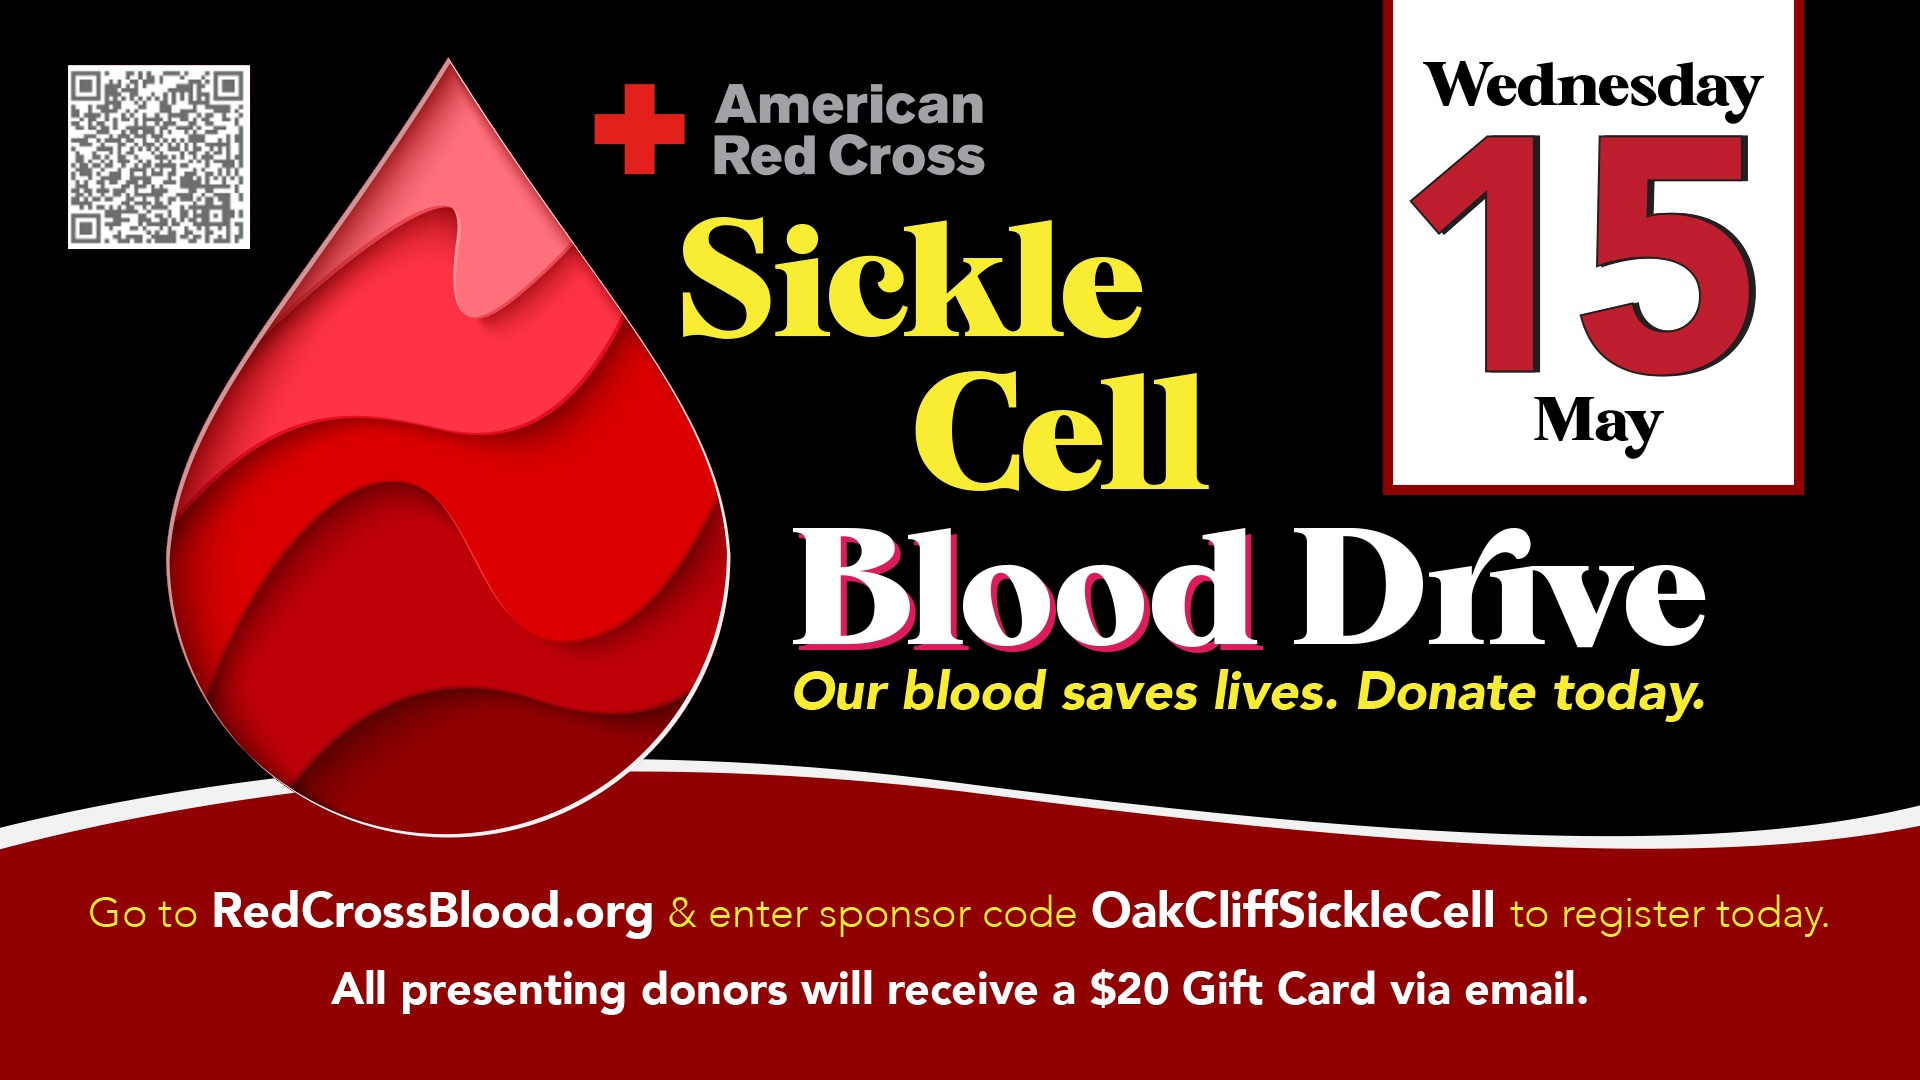 Sickle cell blood drive with American Red Cross